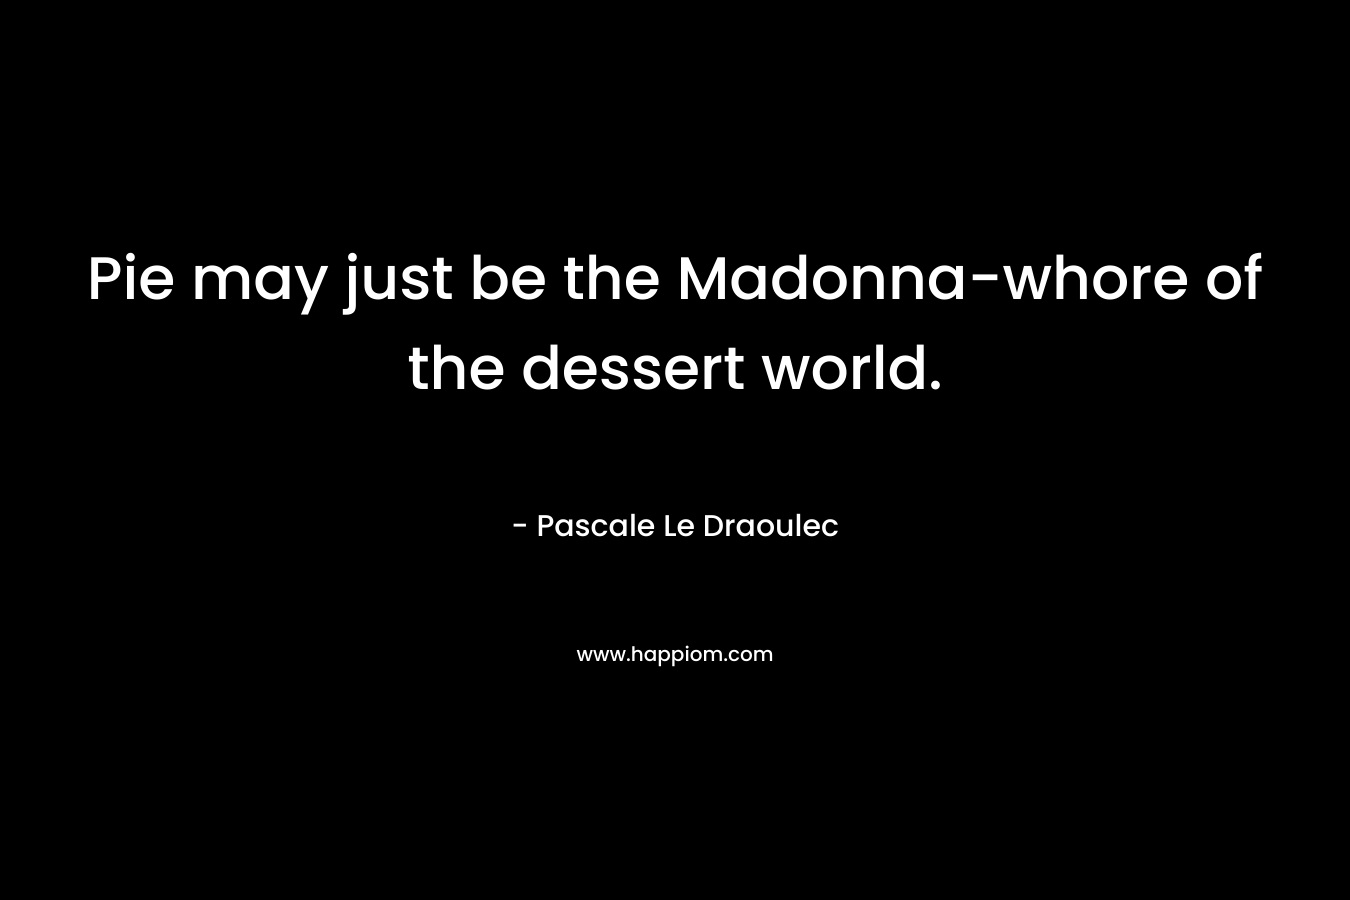 Pie may just be the Madonna-whore of the dessert world.